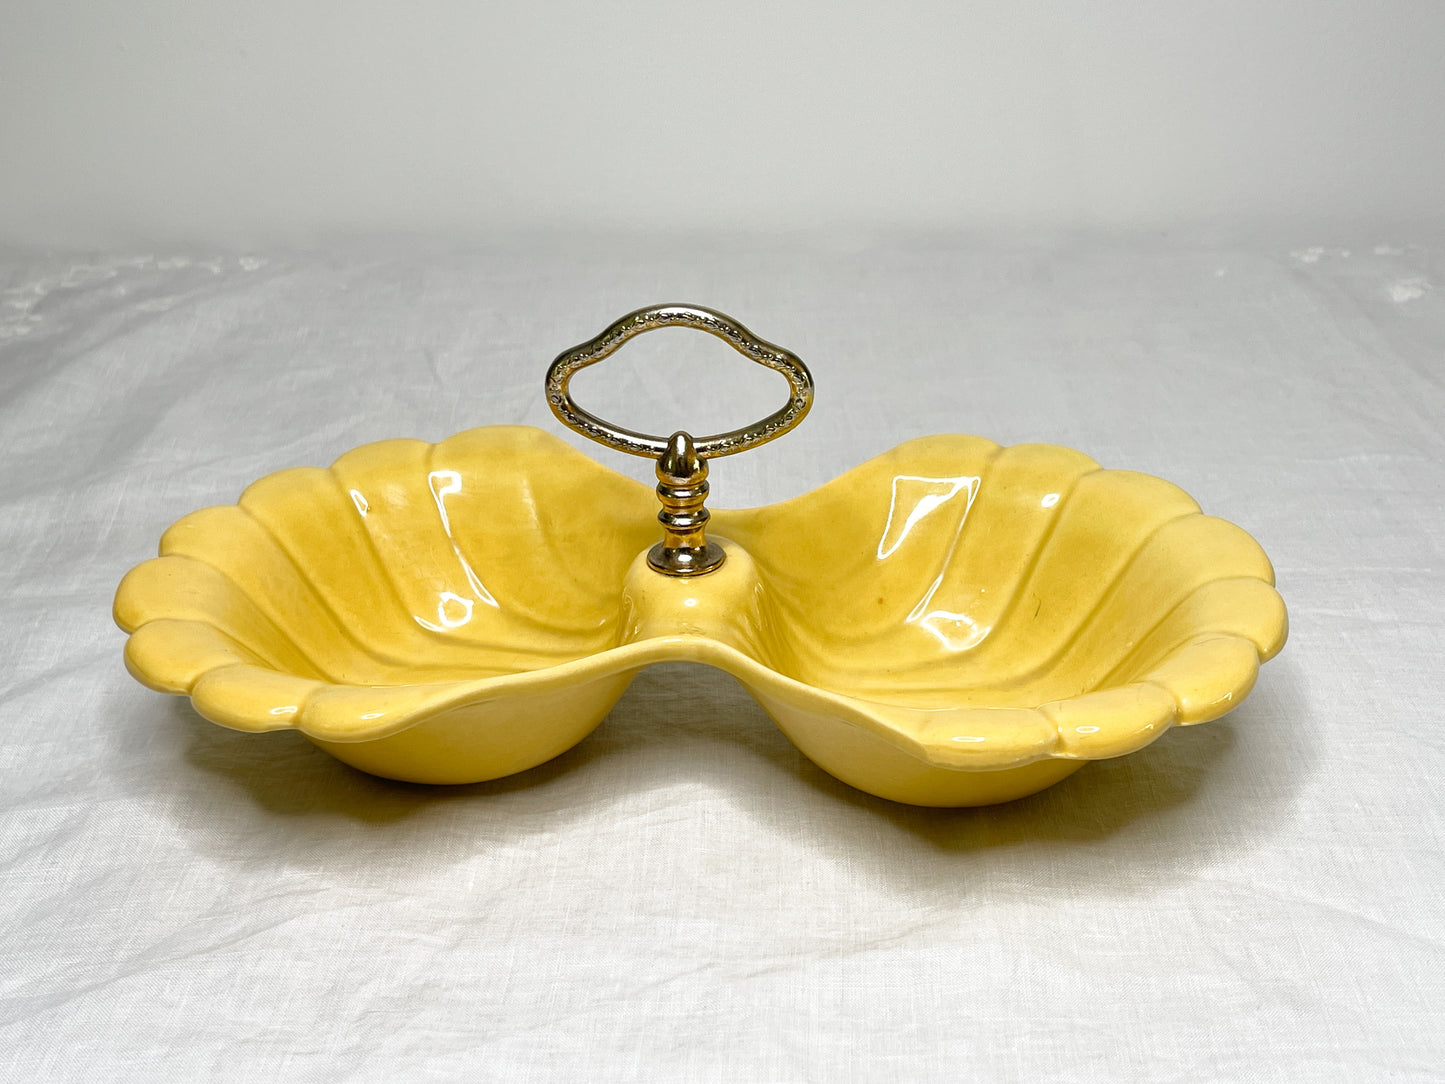 Vintage Ceramic Double Shell Serving Dish.